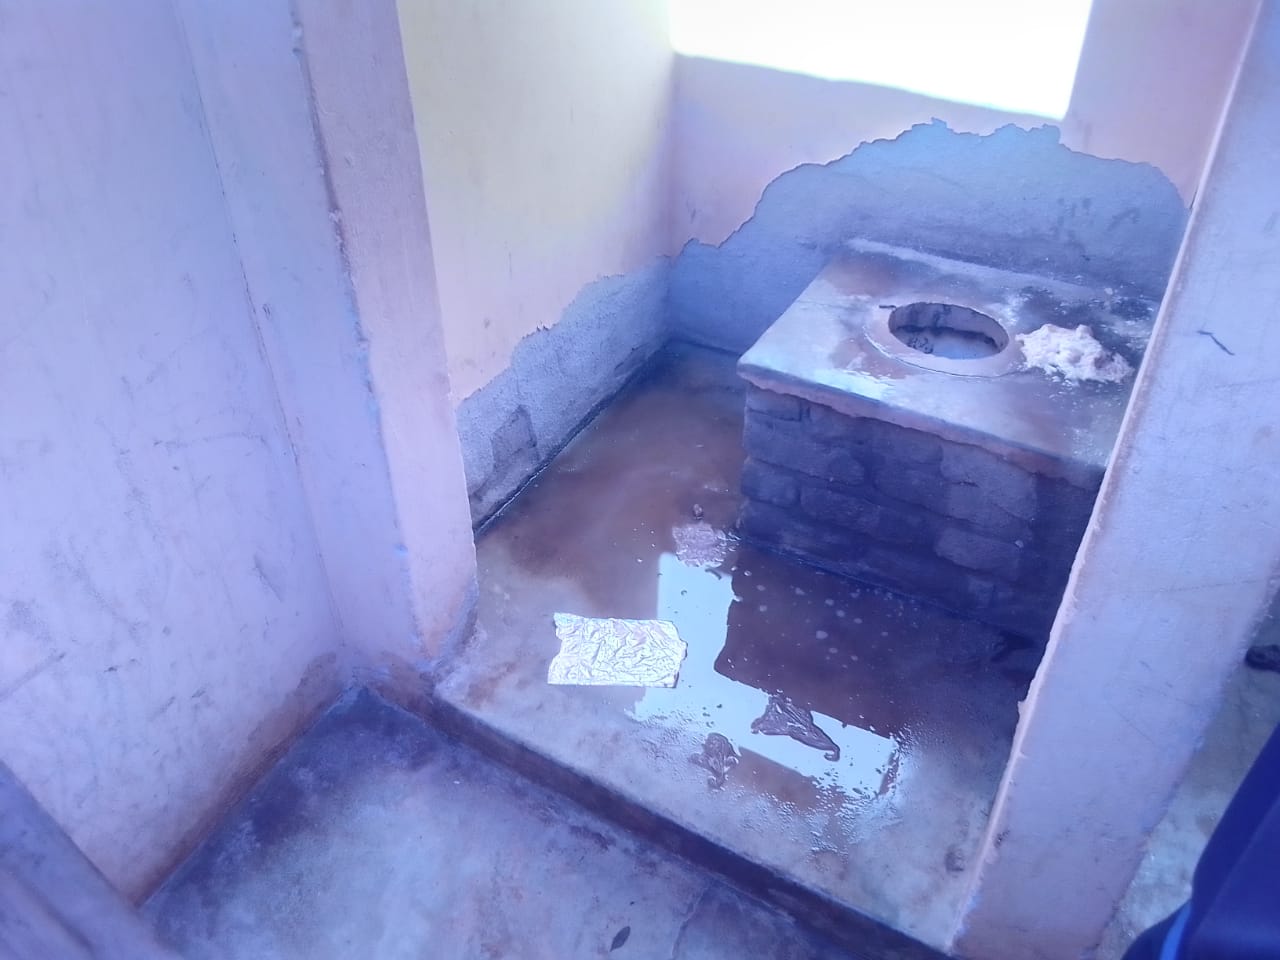 An image of a pit toilet at Mohookone primary school.